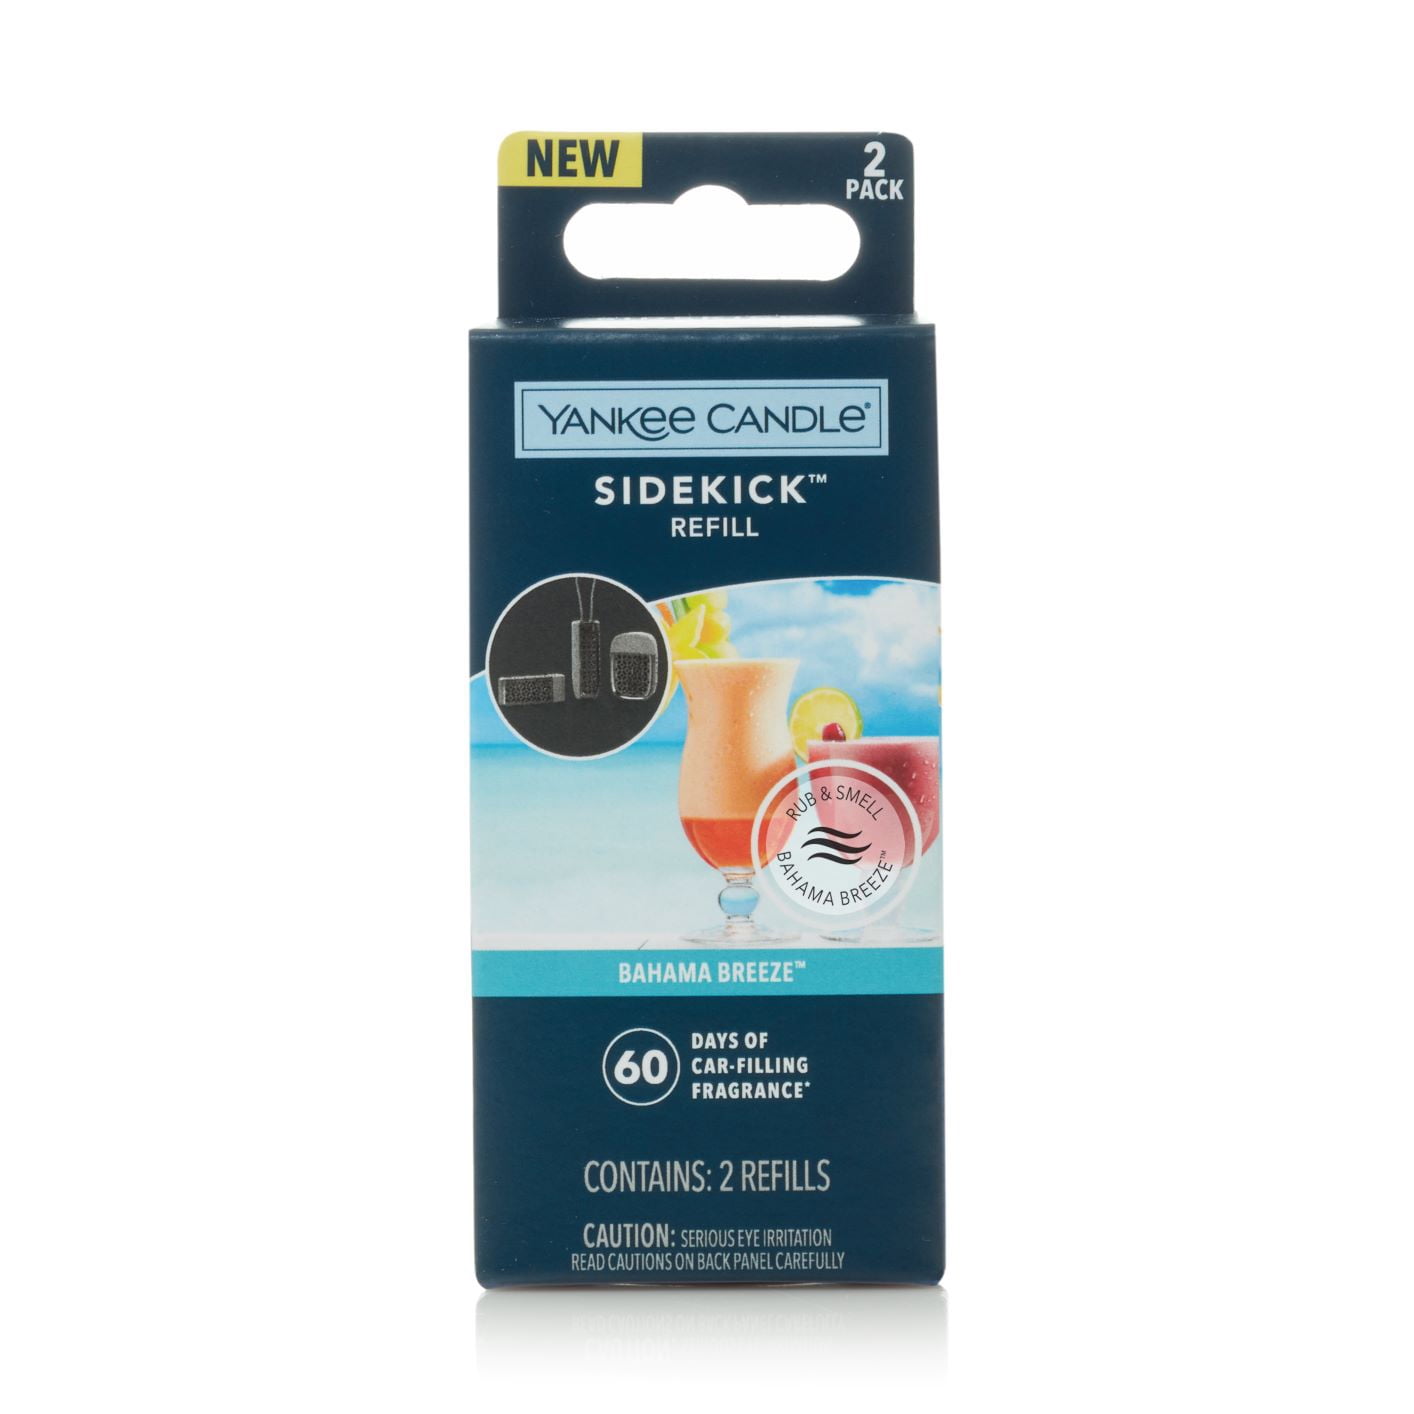 Yankee Candle® Sidekick™ Collection Fragrance Refill 2 Pack, Bahama Breeze